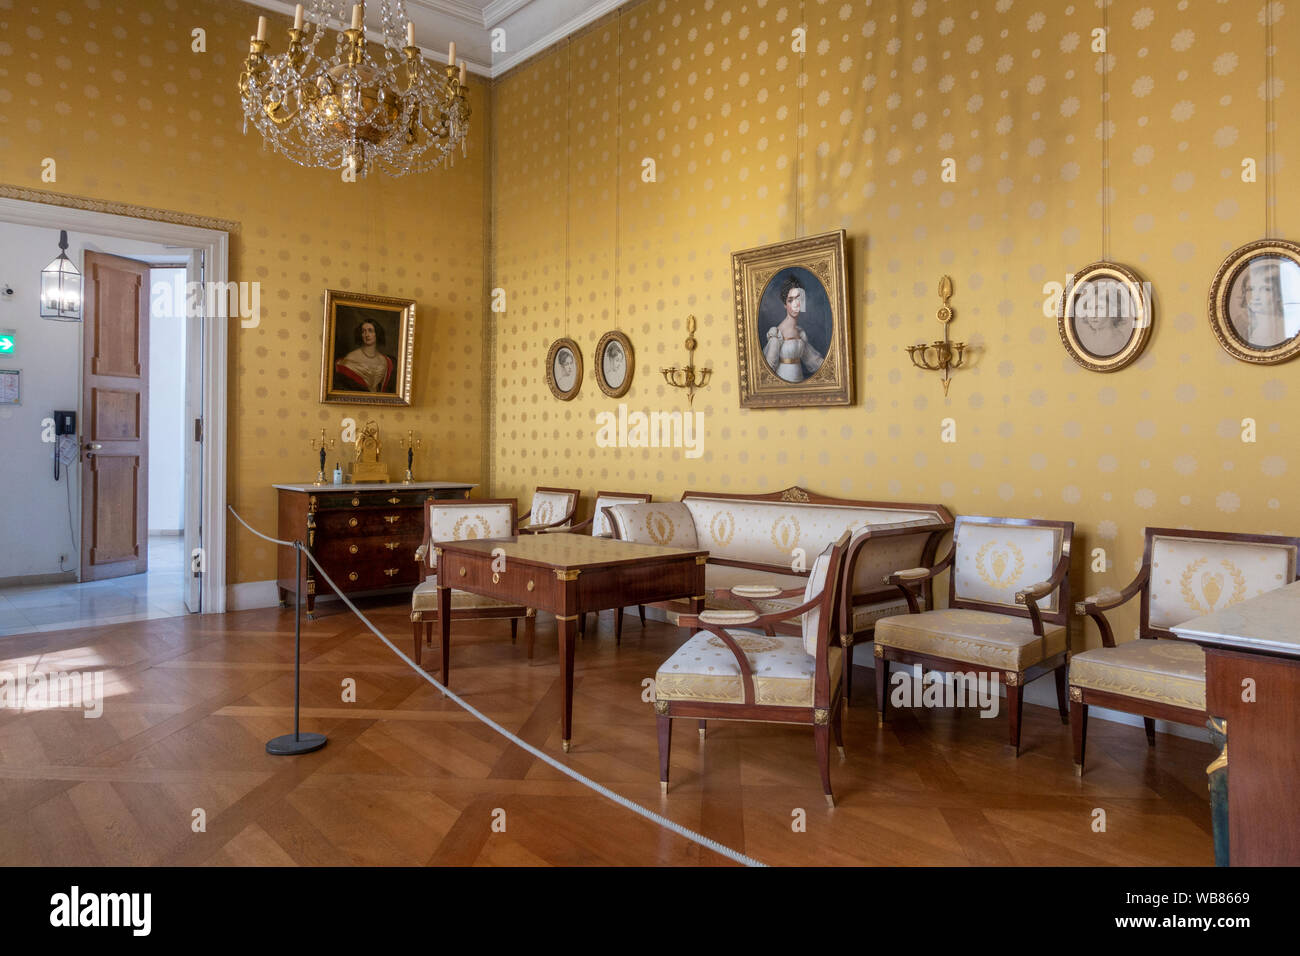 part of the Court Garden Rooms and Charlotte Chambers, Munich Residenz, Munich, Bavaria, Germany. Stock Photo